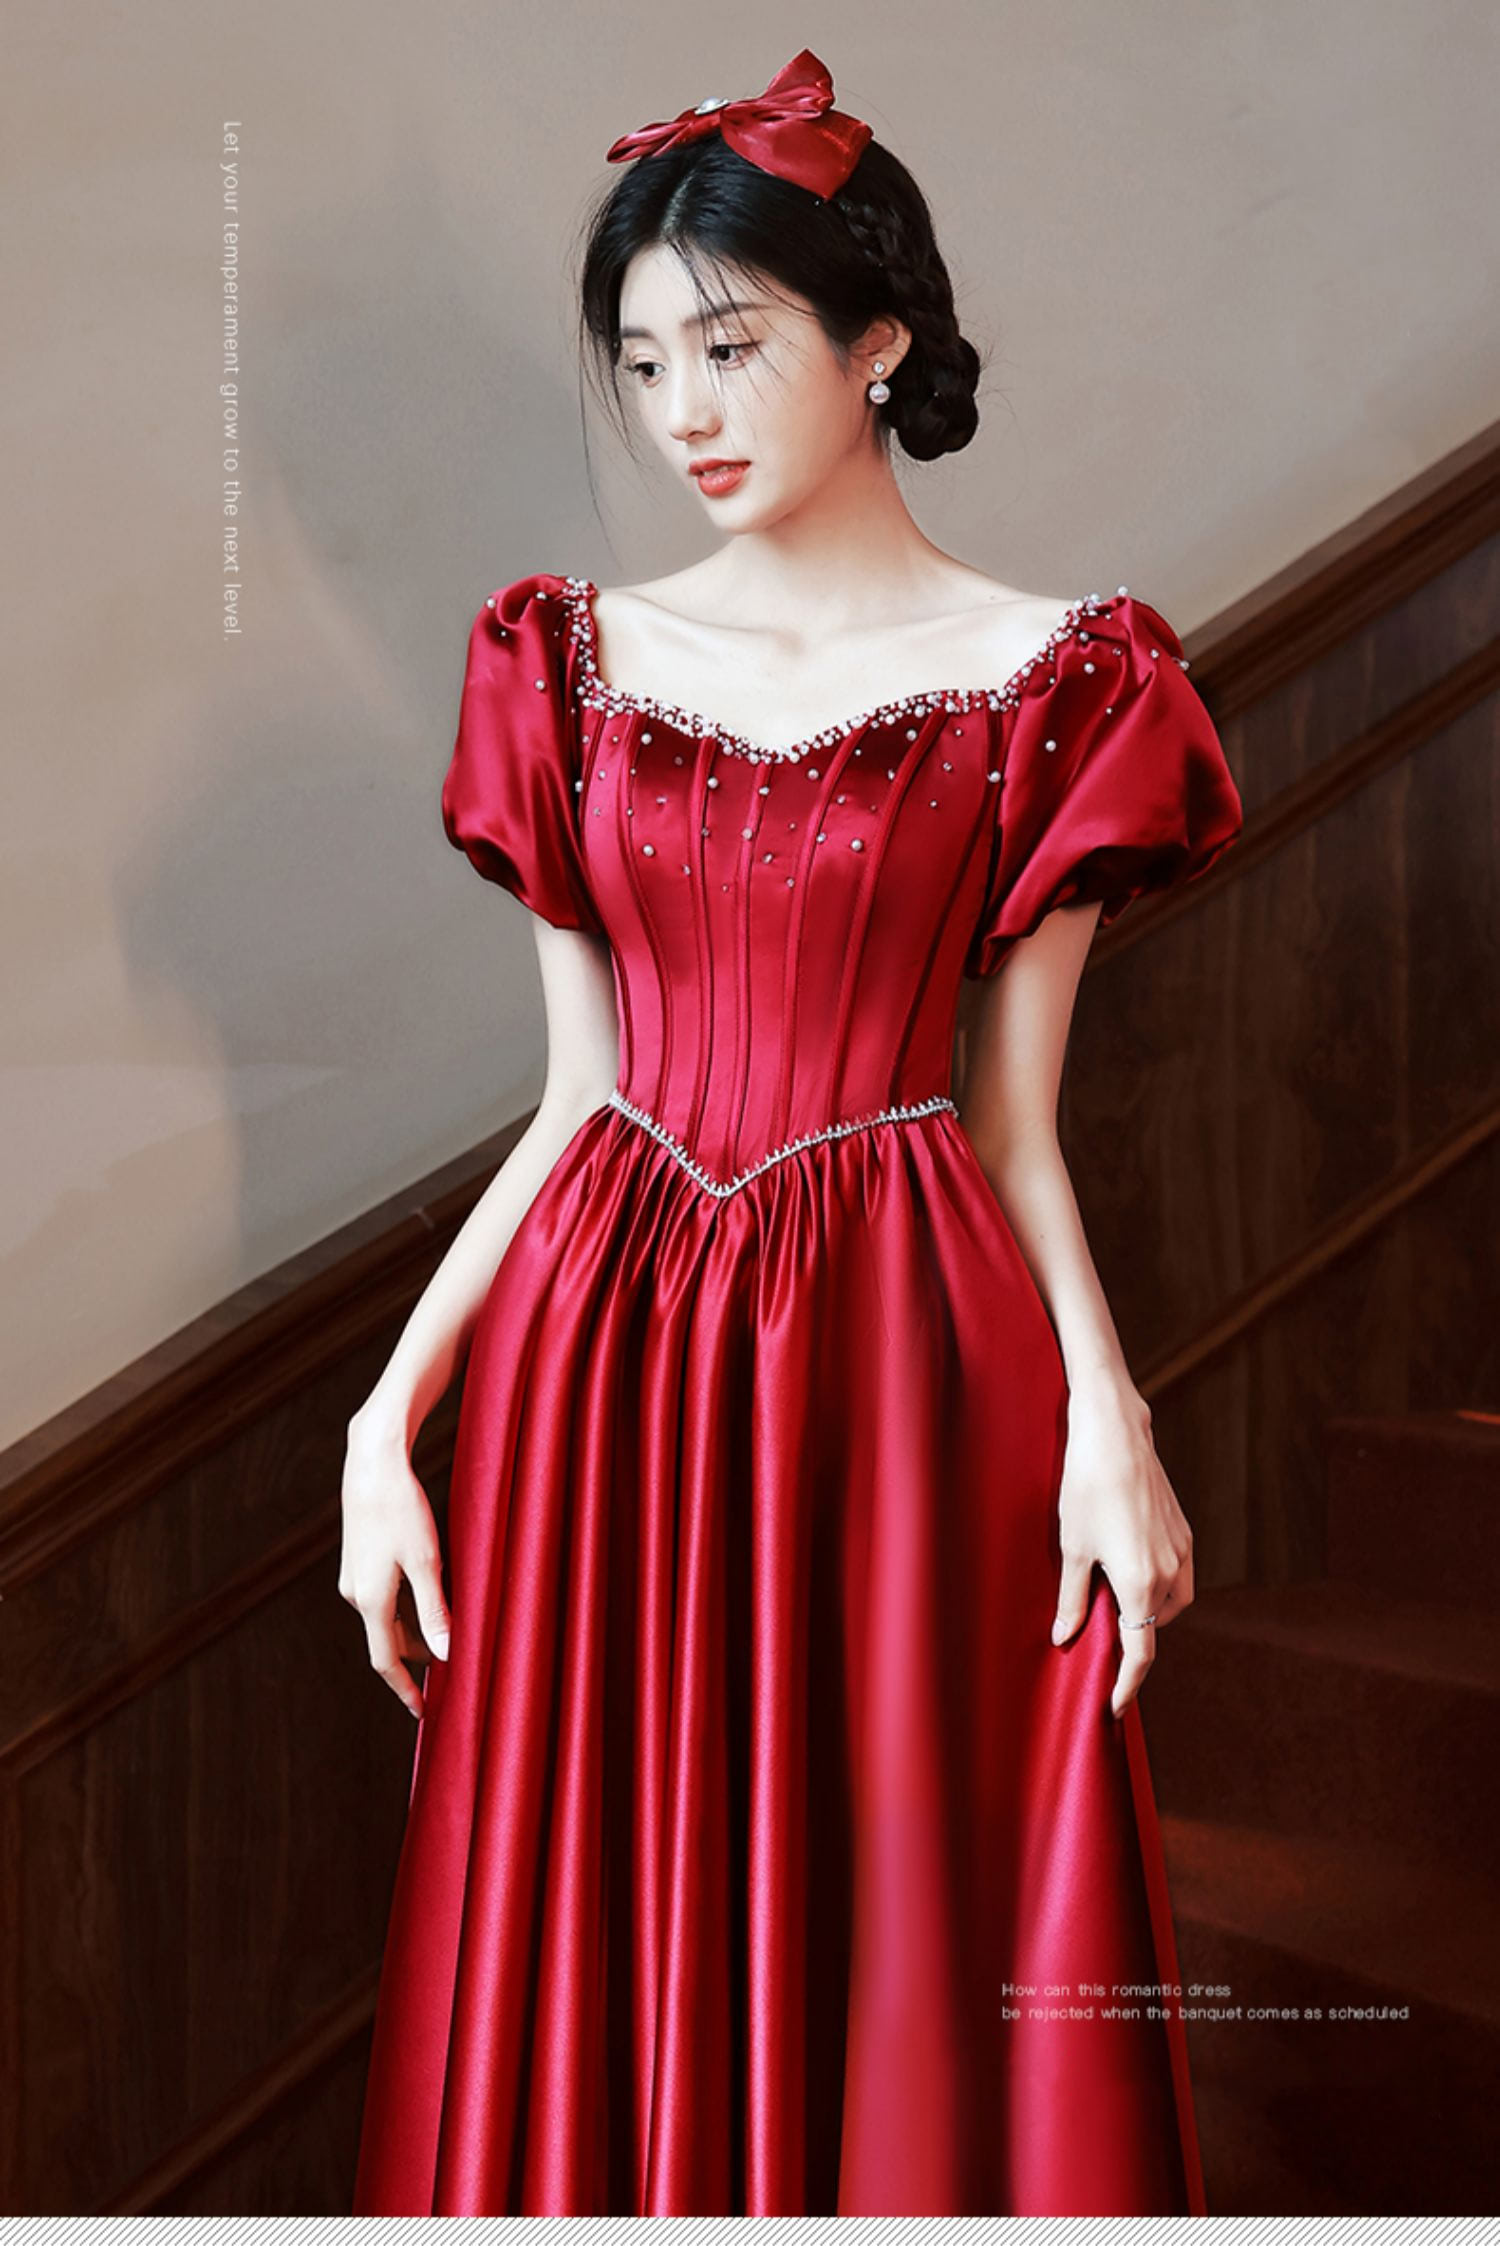 A-Line-Classy-Satin-Cocktail-Formal-Prom-Long-Dress-with-Sleeves07